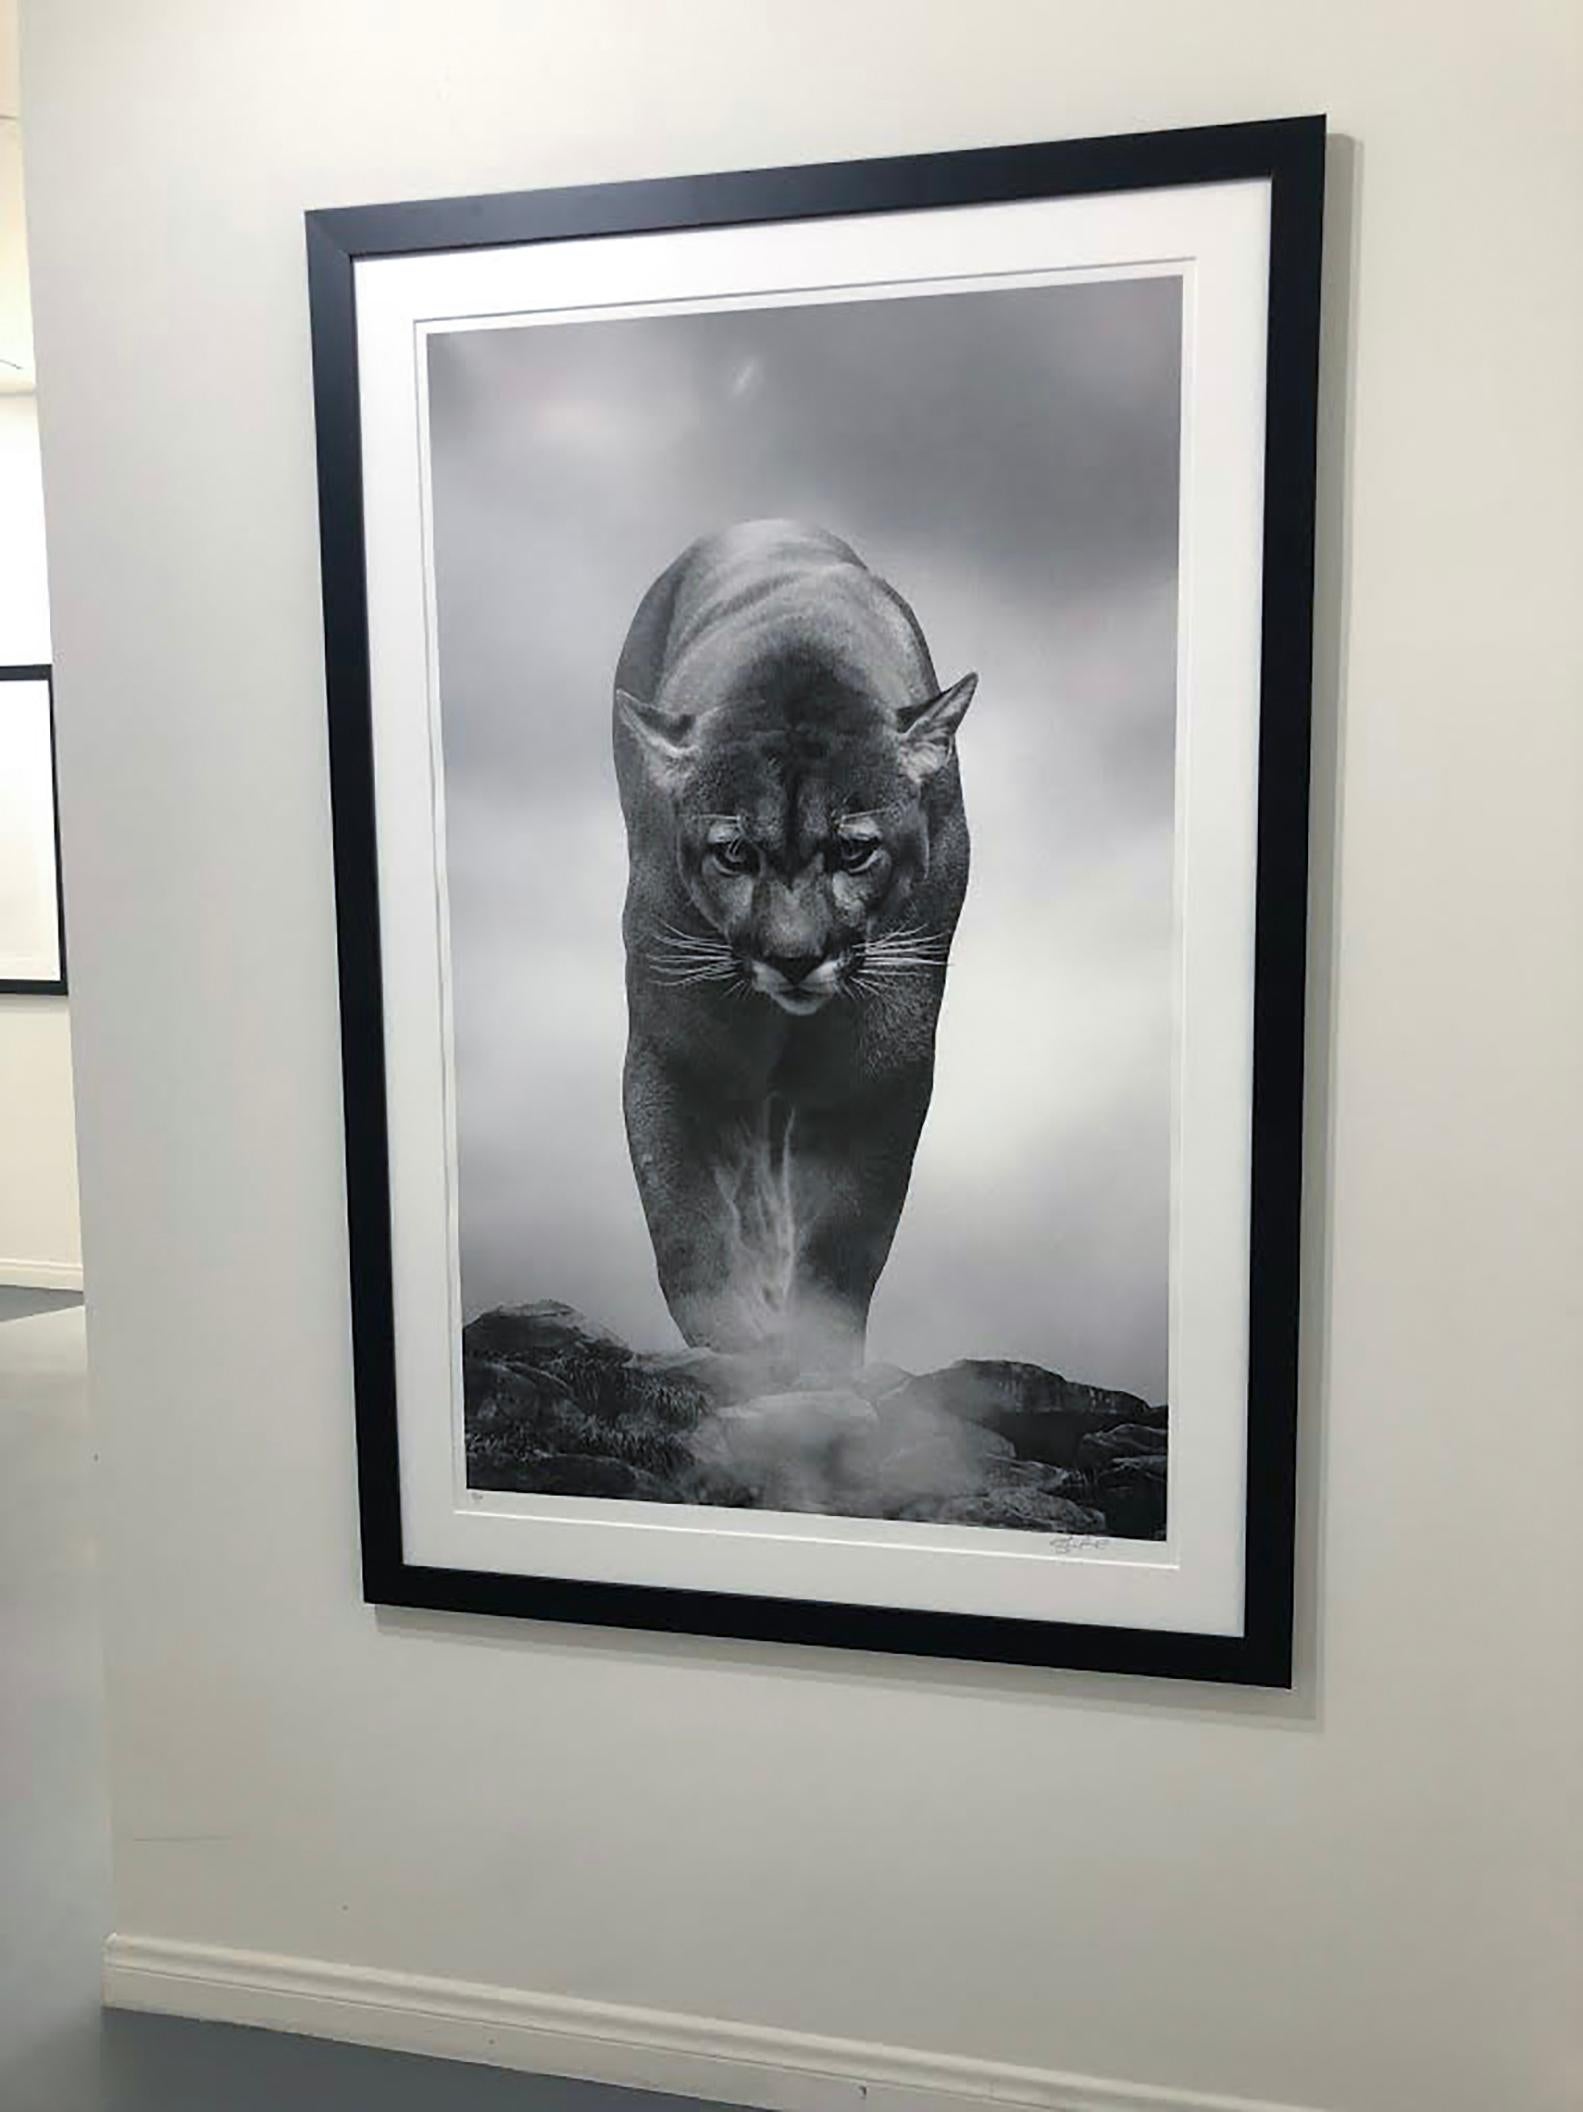 King of the Mountain - 36x48 Black and White Photography, Cougar, Mountain Lion - Print by Shane Russeck